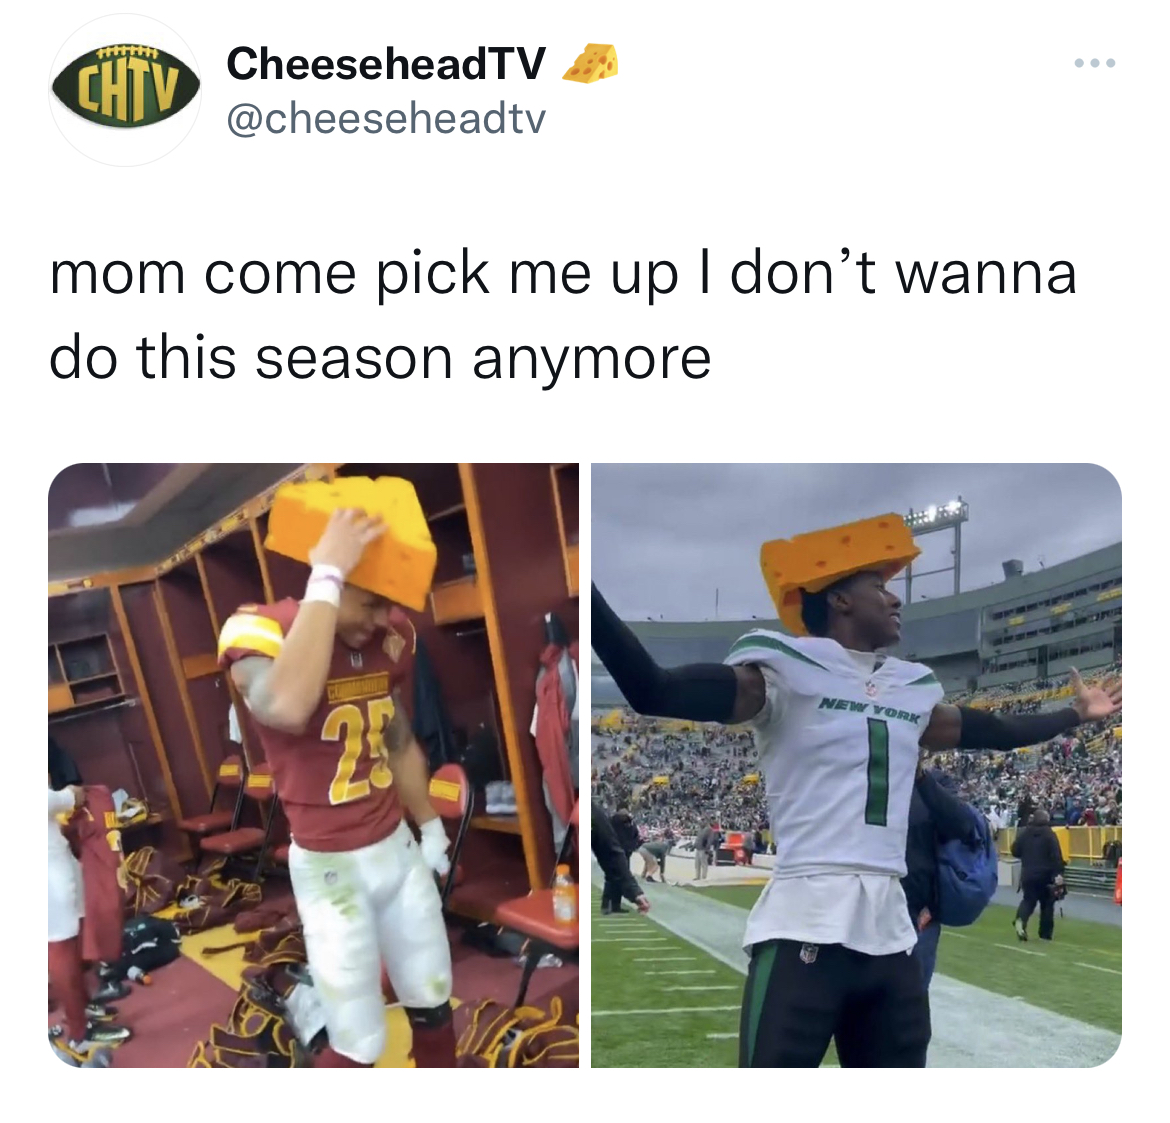 tweets roasting celebs - Chtv CheeseheadTV mom come pick me up I don't wanna do this season anymore 25 New York